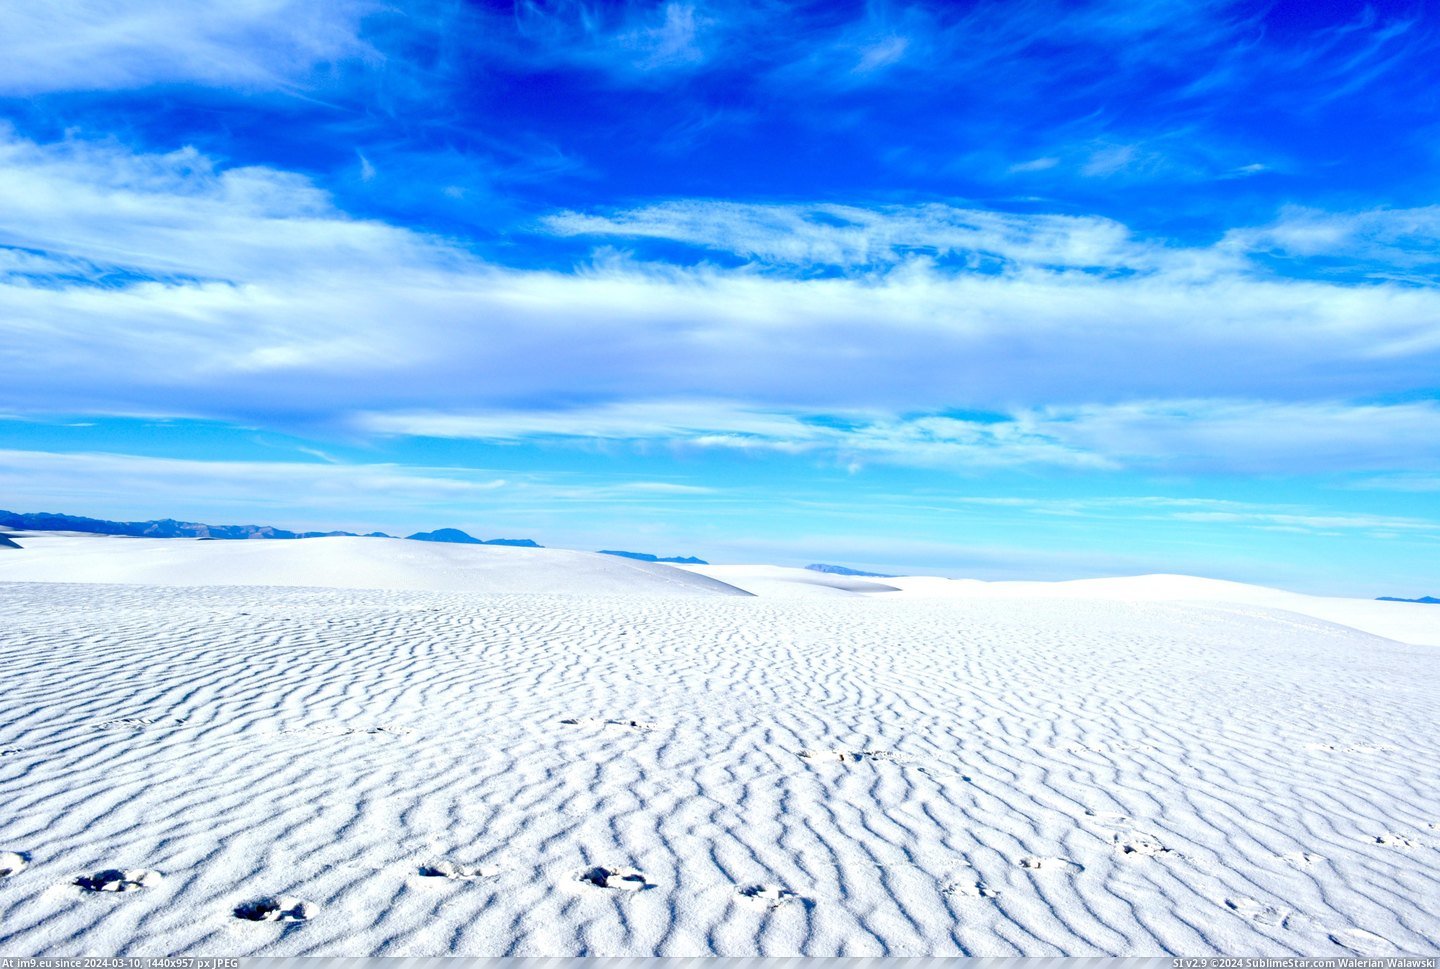 #One #White #National #Mexico #Sands #Exploring #Gems #America #Hidden #Monument [Earthporn] I have been exploring America's hidden gems lately. This one is taken in White Sands National Monument, New Mexico.  Pic. (Изображение из альбом My r/EARTHPORN favs))